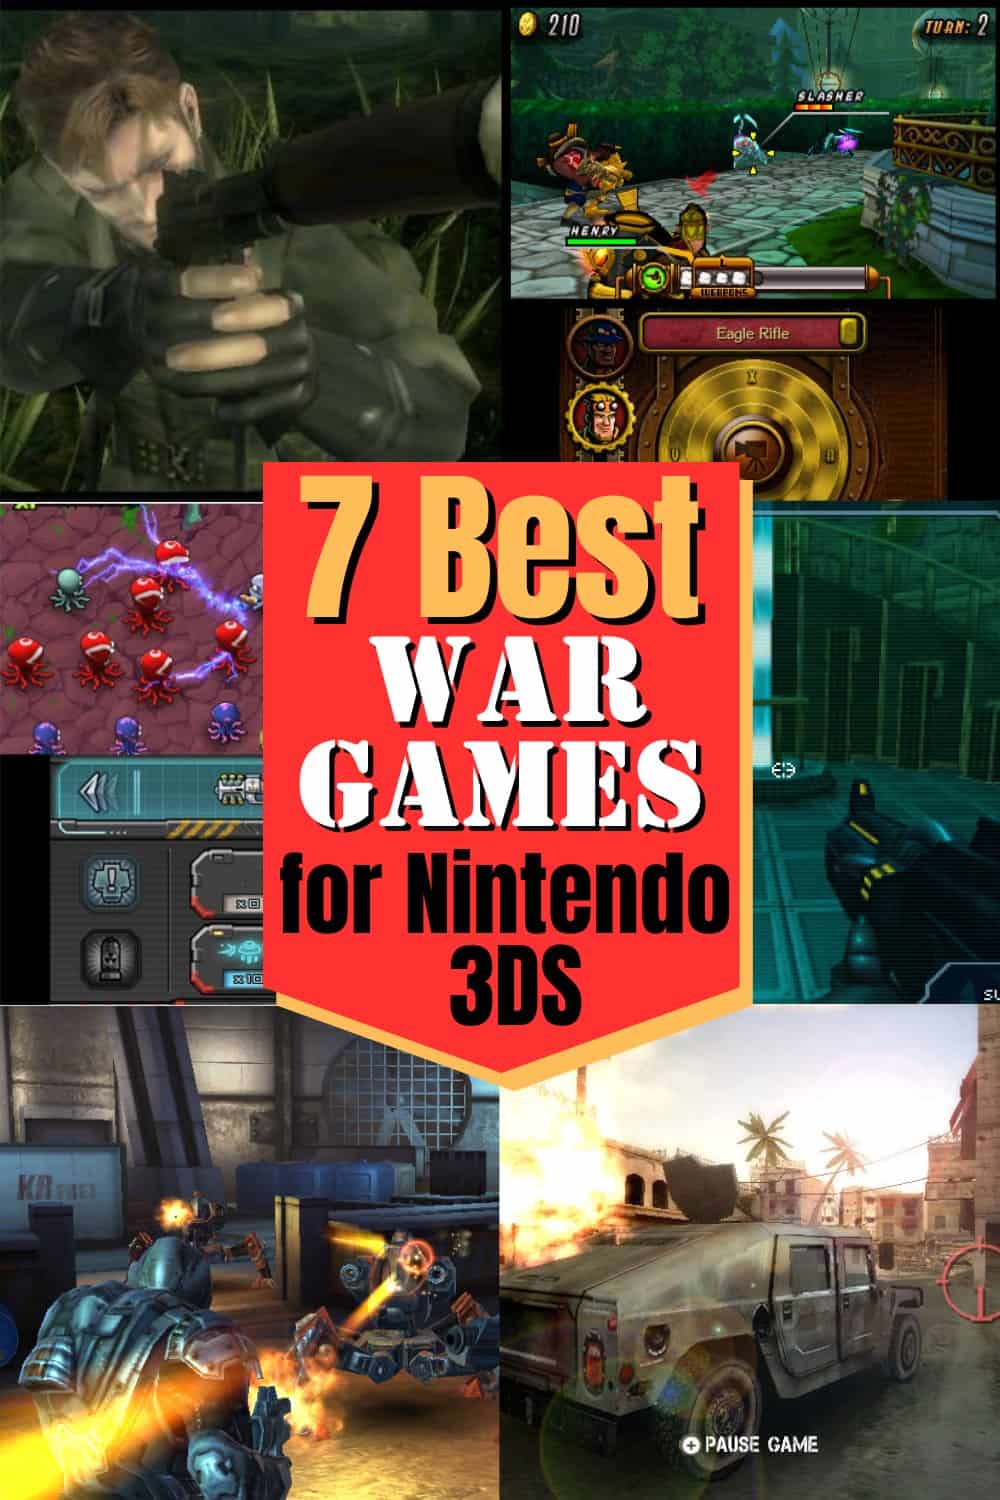 List of military games for the 3DS